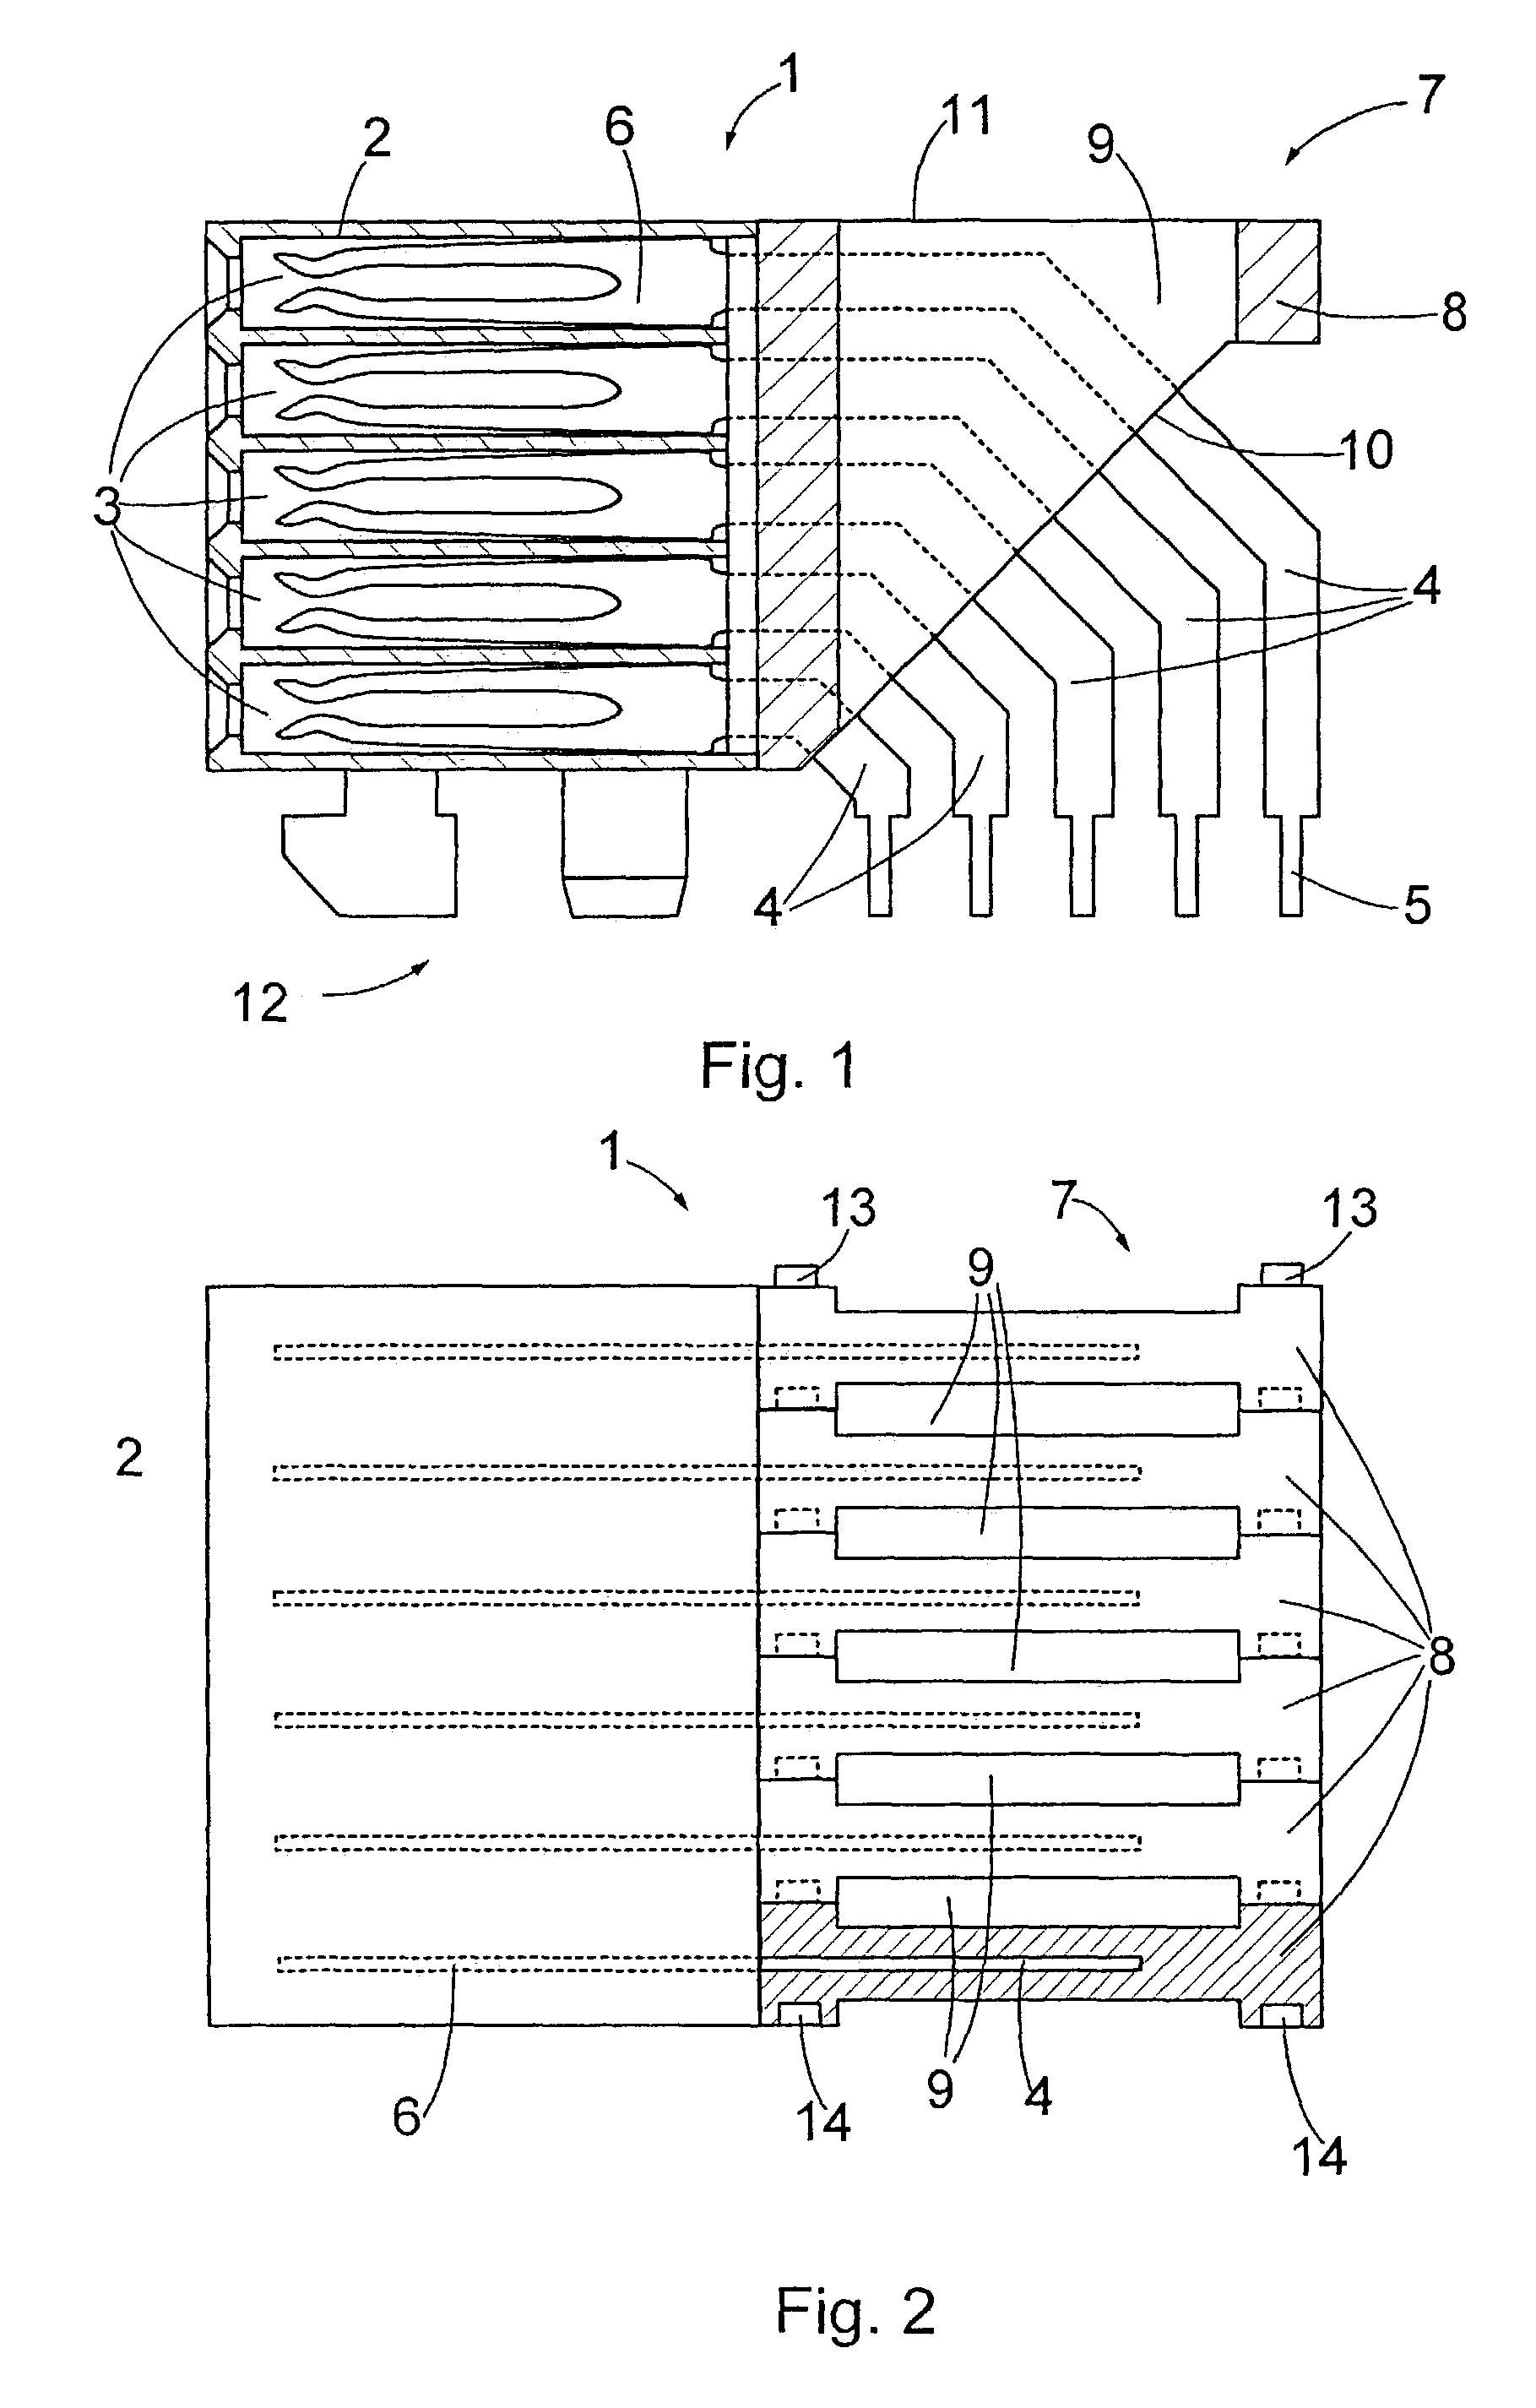 Connector and contact wafer